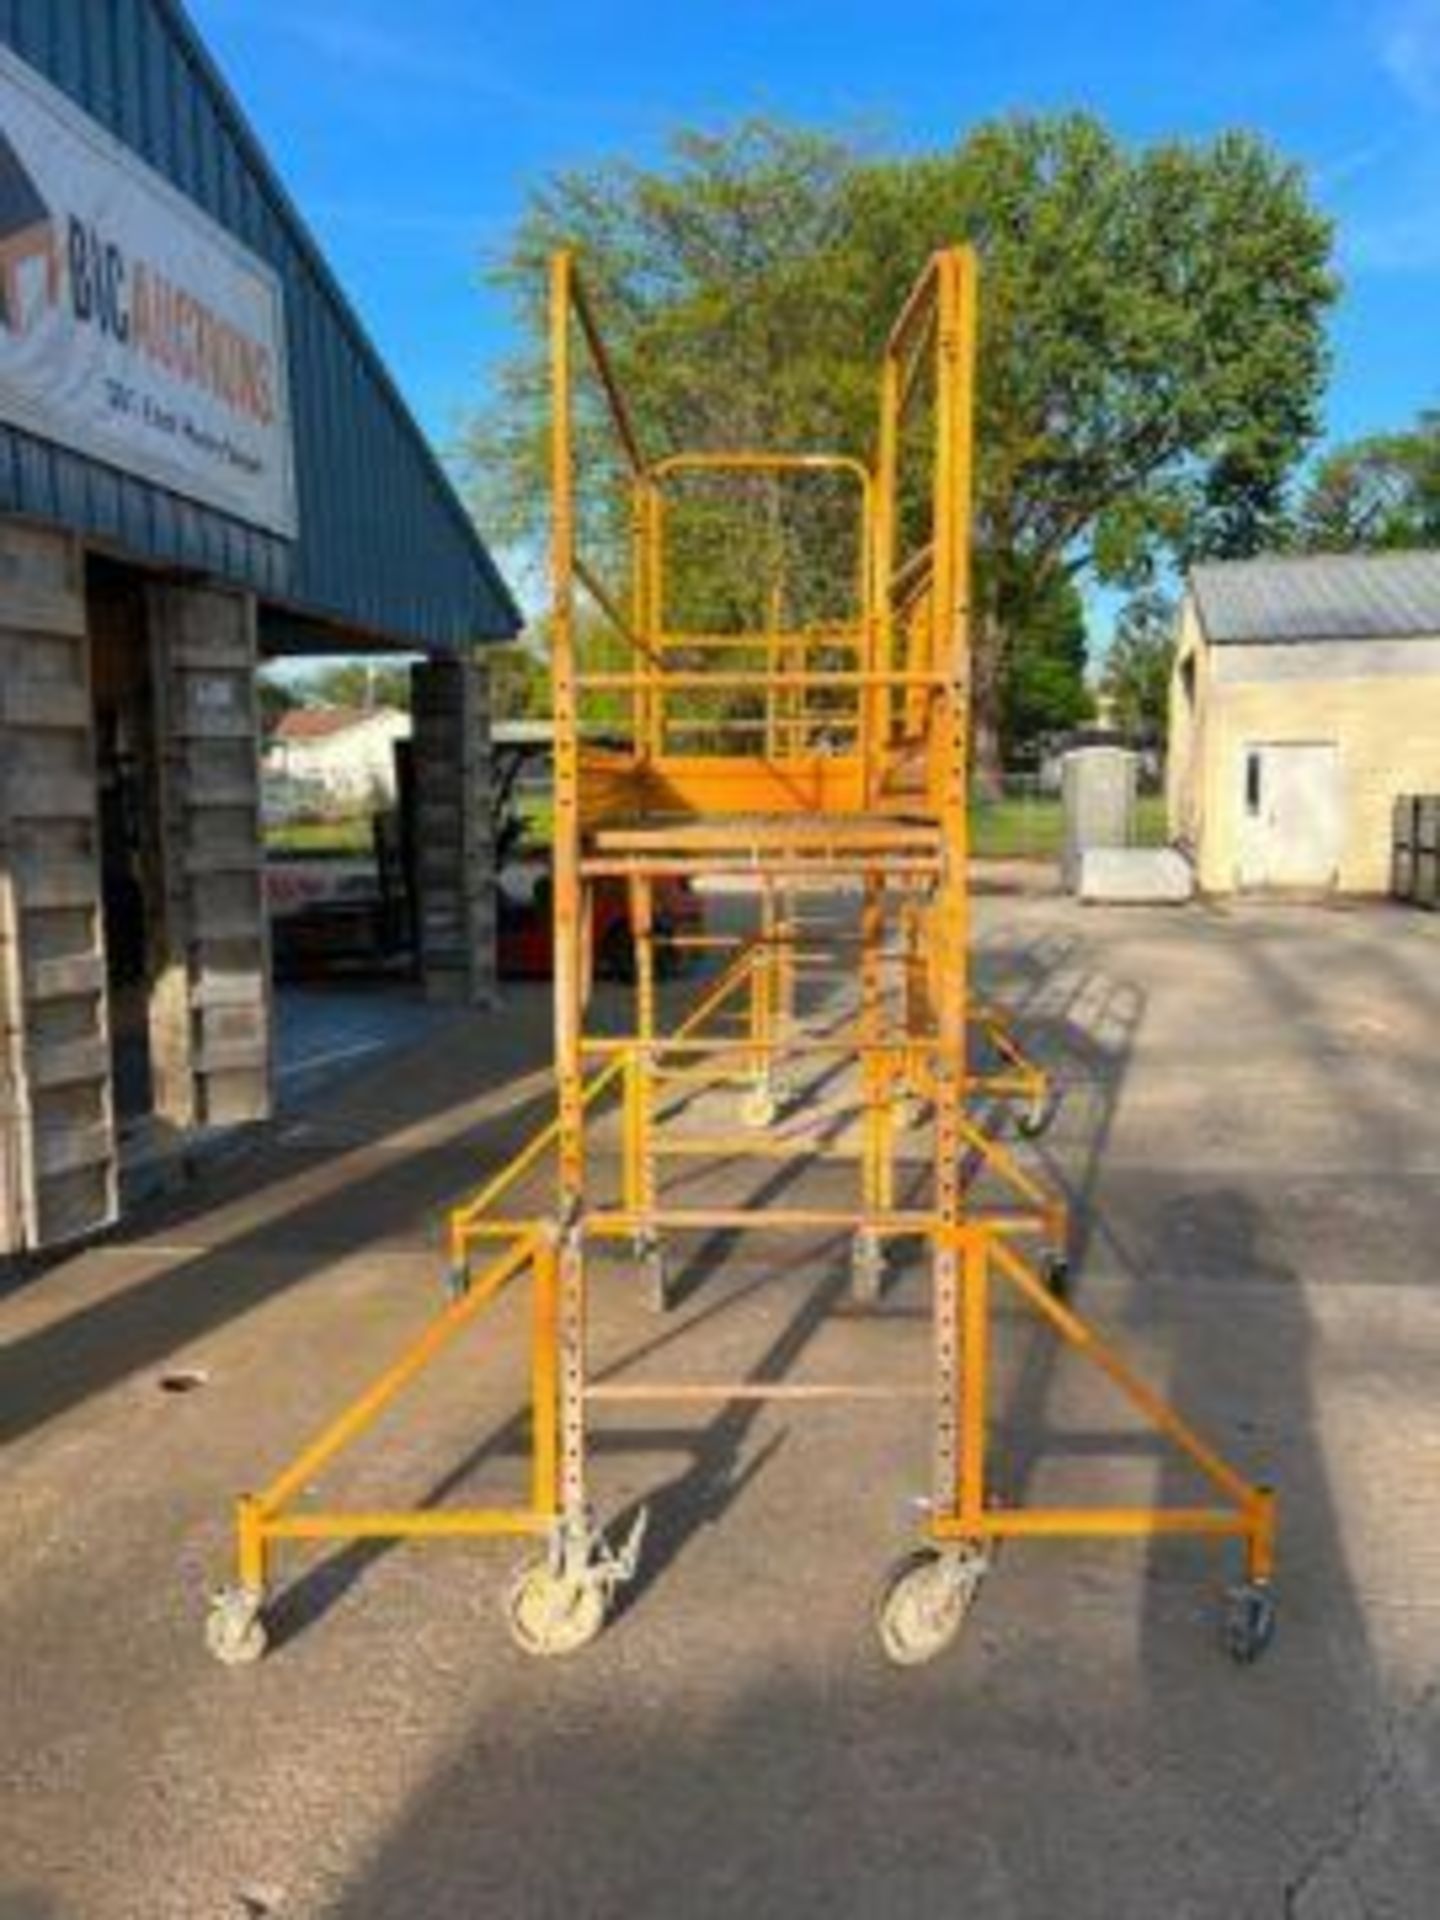 6' Bil-Jax Pro-Jax Utility Scaffold with casters, New Guard Rail Pkg. & New Outrigger. Located in Mt - Image 2 of 10